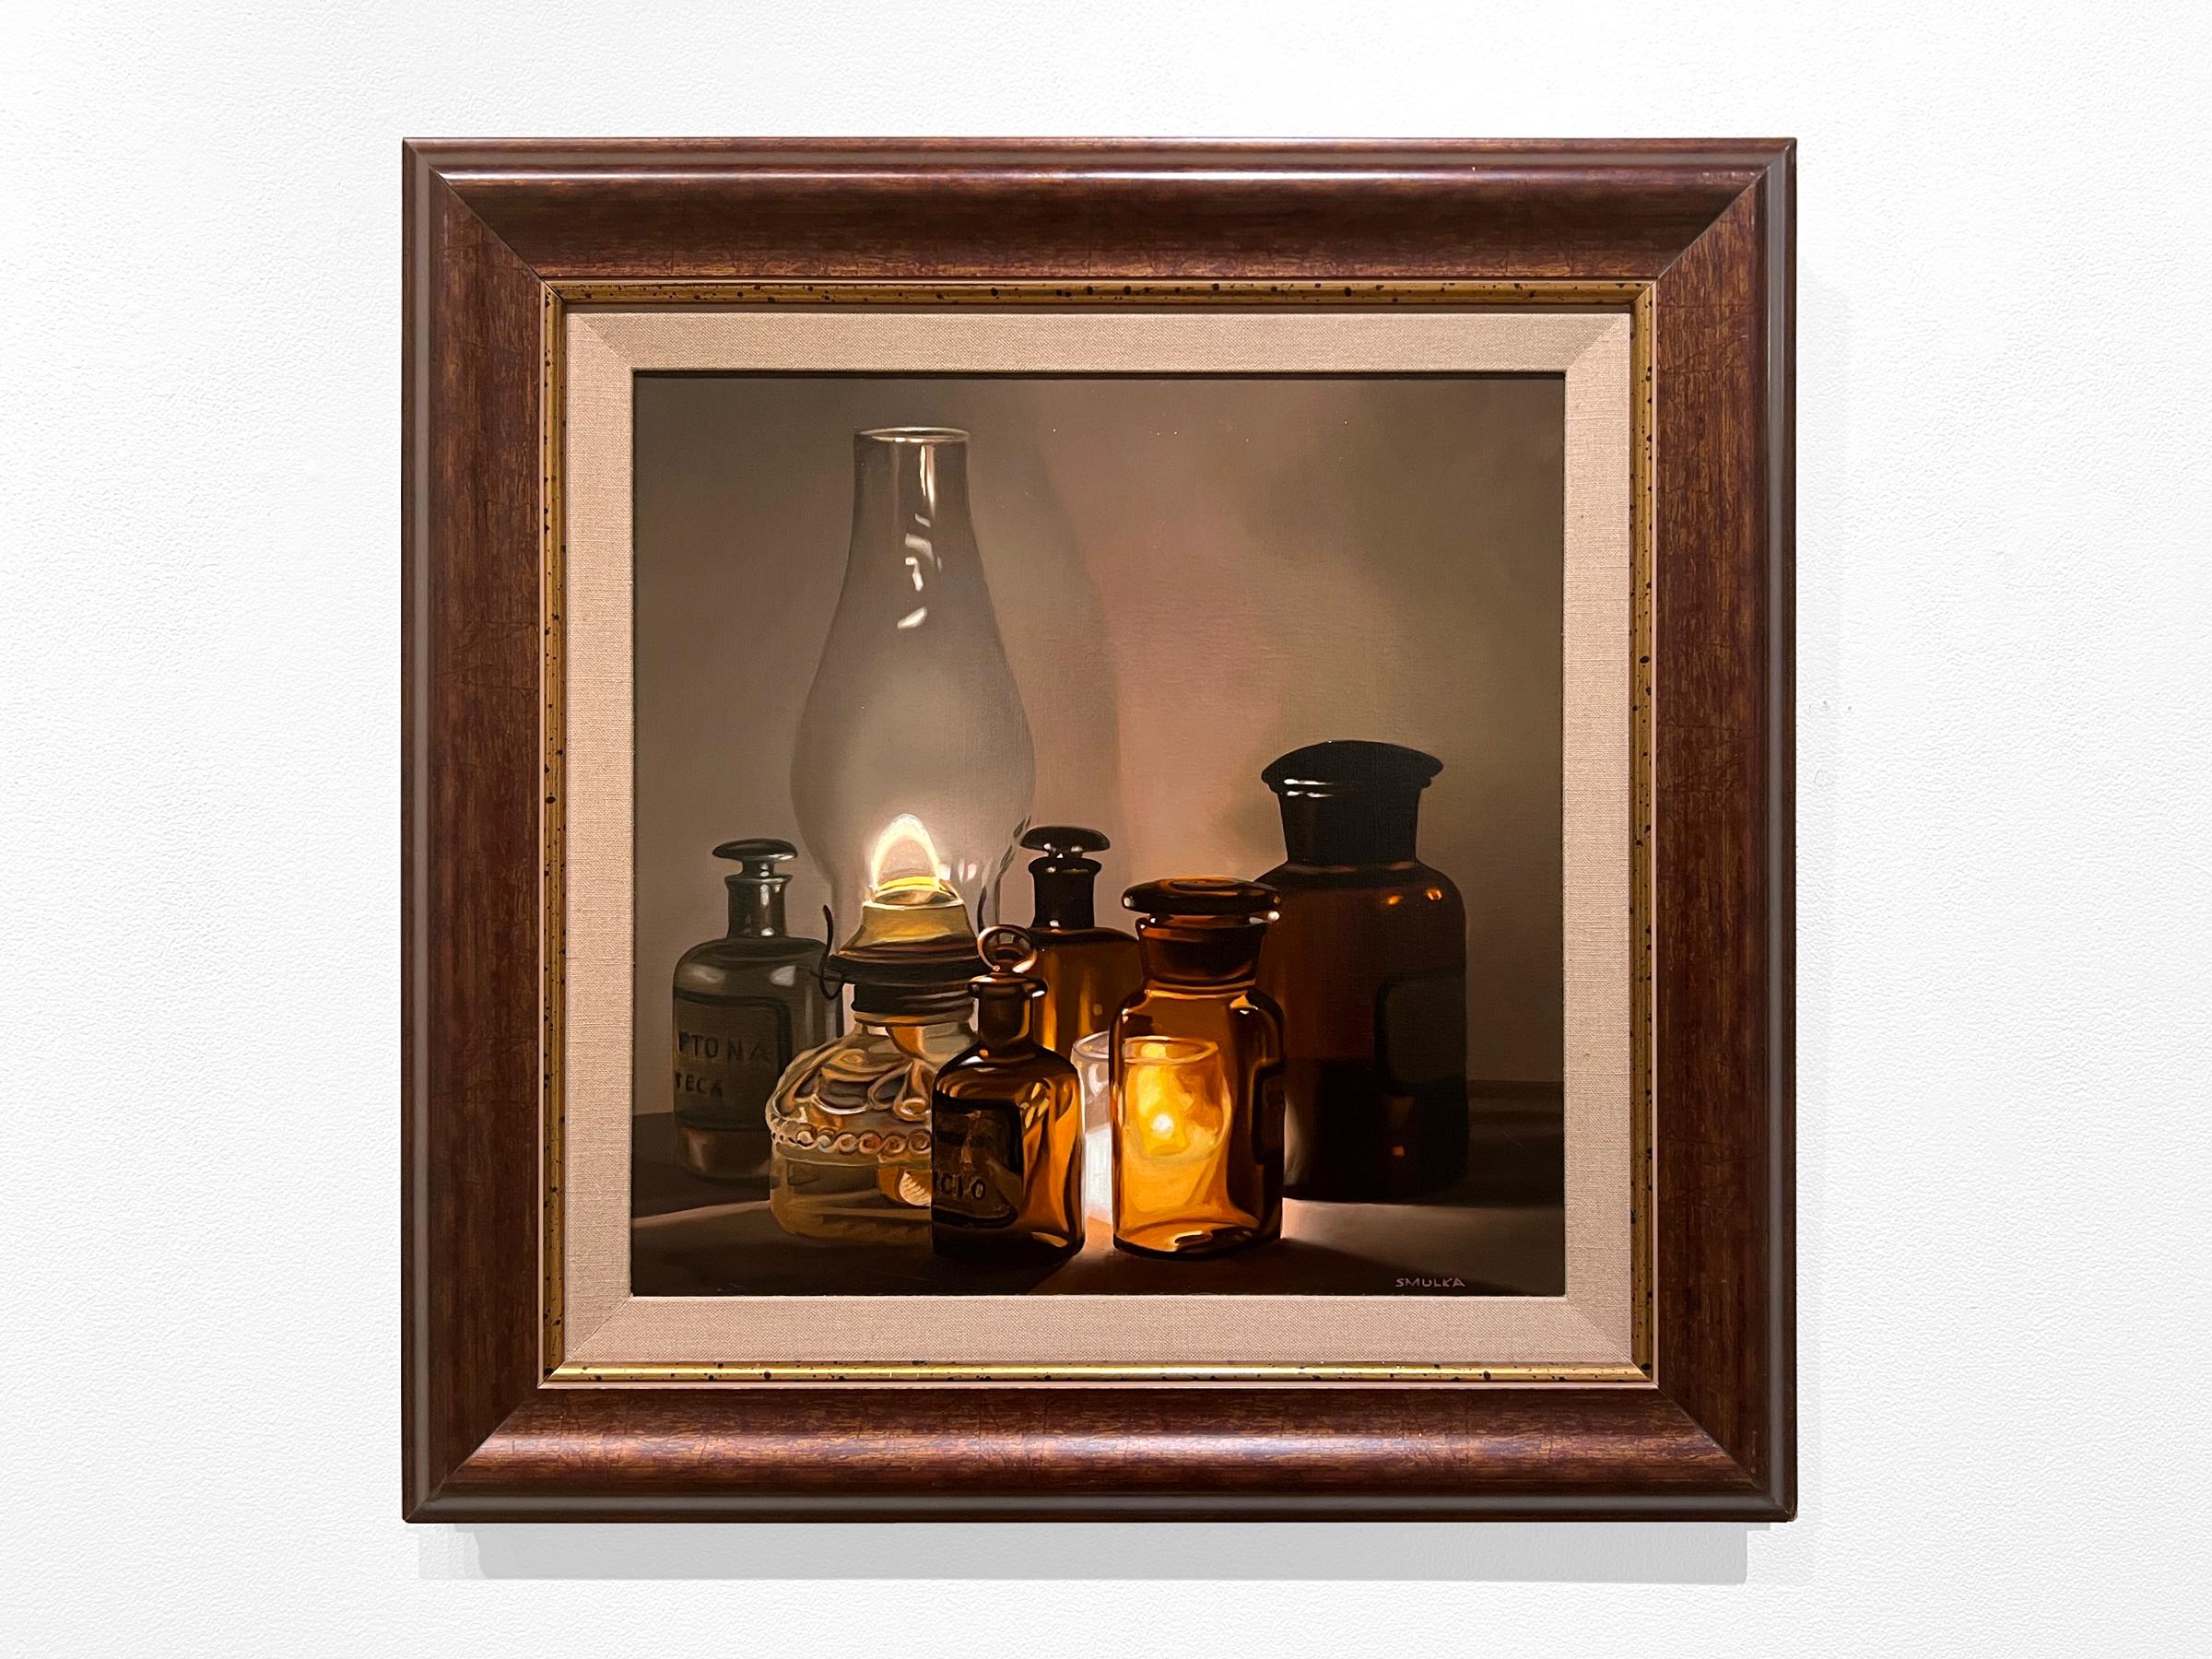 CANDLE STUDY - Photorealism / Vintage Candle Still Life / Glass Bottles - Painting by Steve Smulka